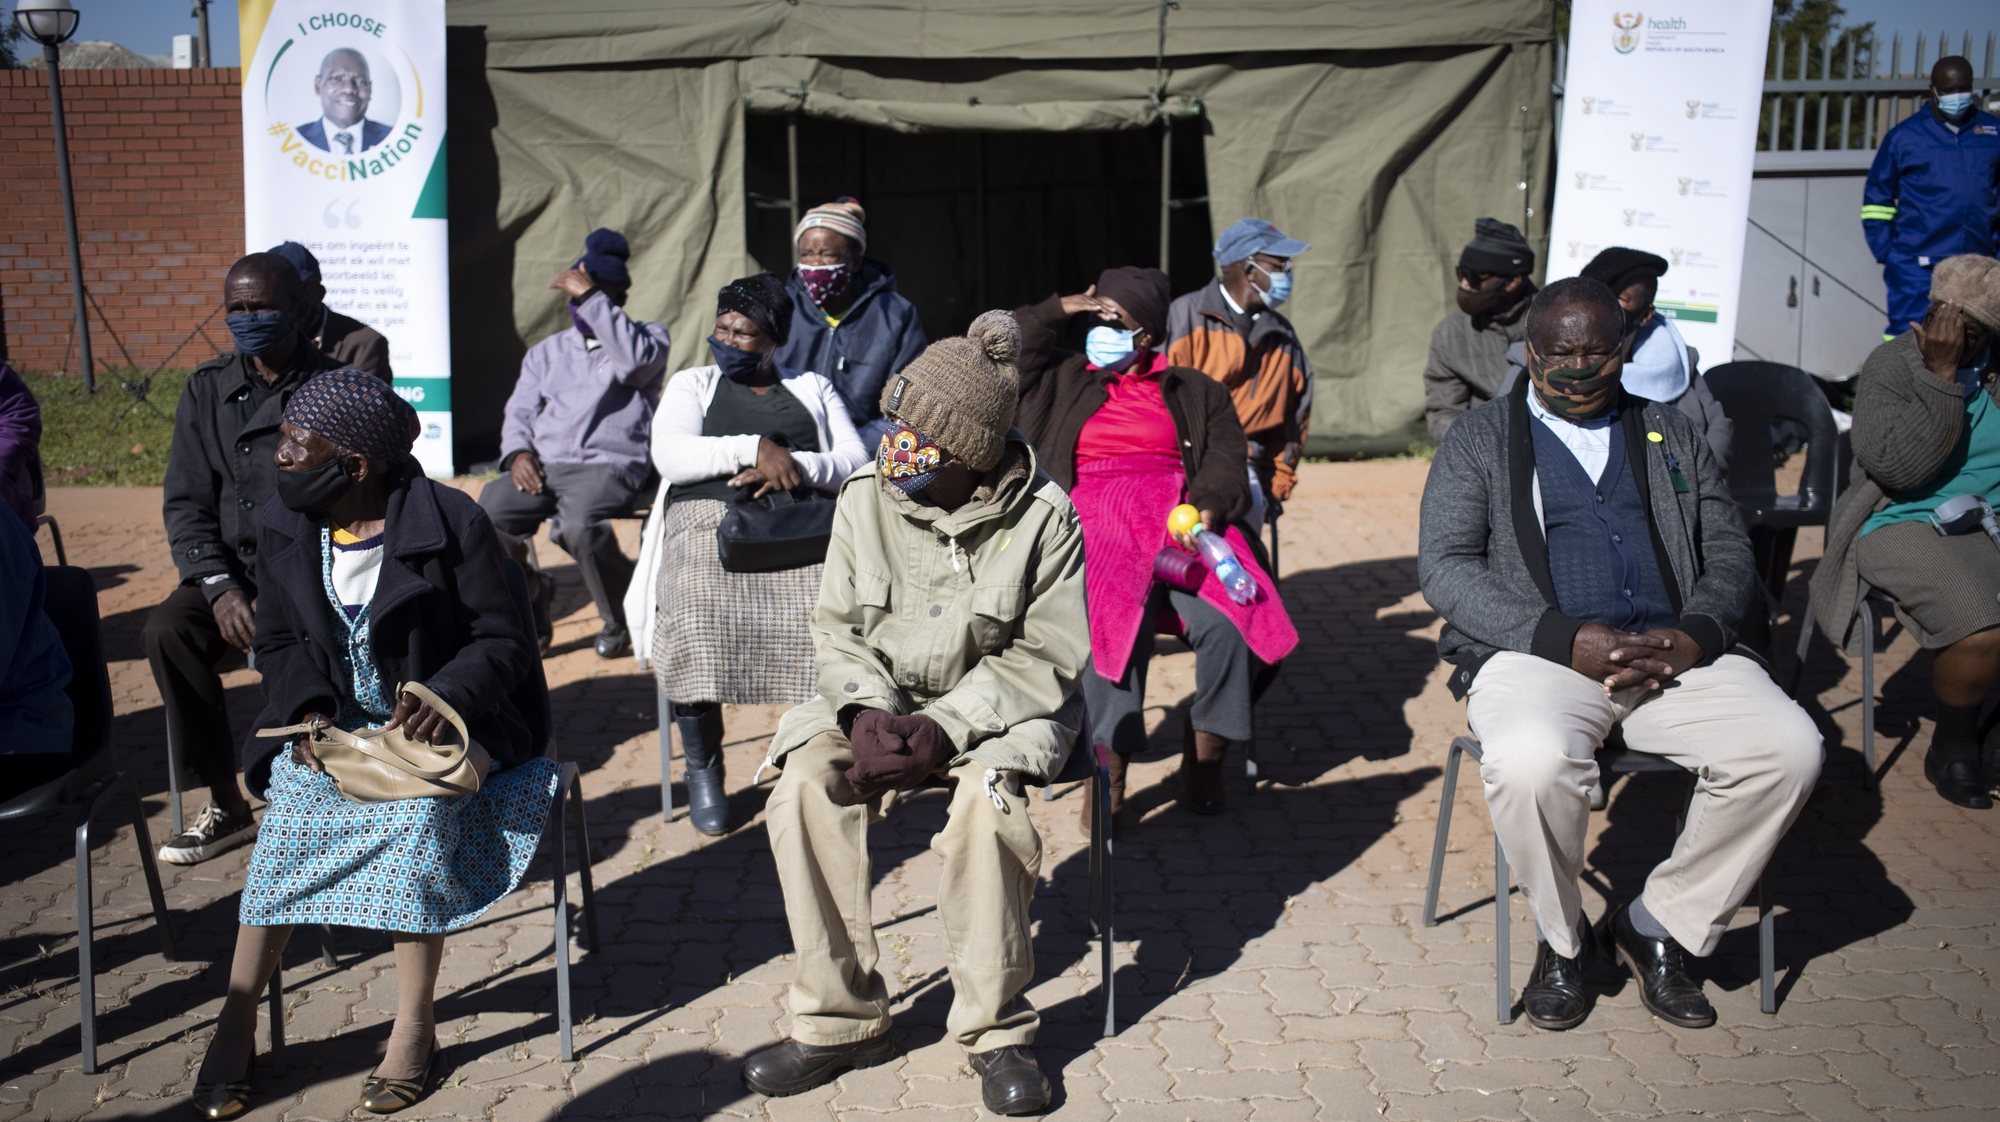 epa09206341 Elderly members of the community wait in line to receive their vaccination during the first day of Covid-19 vaccinations for the over 60 year old population in the country, in Johannesburg, South Africa, 17 May 2021. The first round of vaccinations was for the health care workers in the country. South Africa is lagging behind many countries in the world in its vaccination program.  EPA/Kim Ludbrook